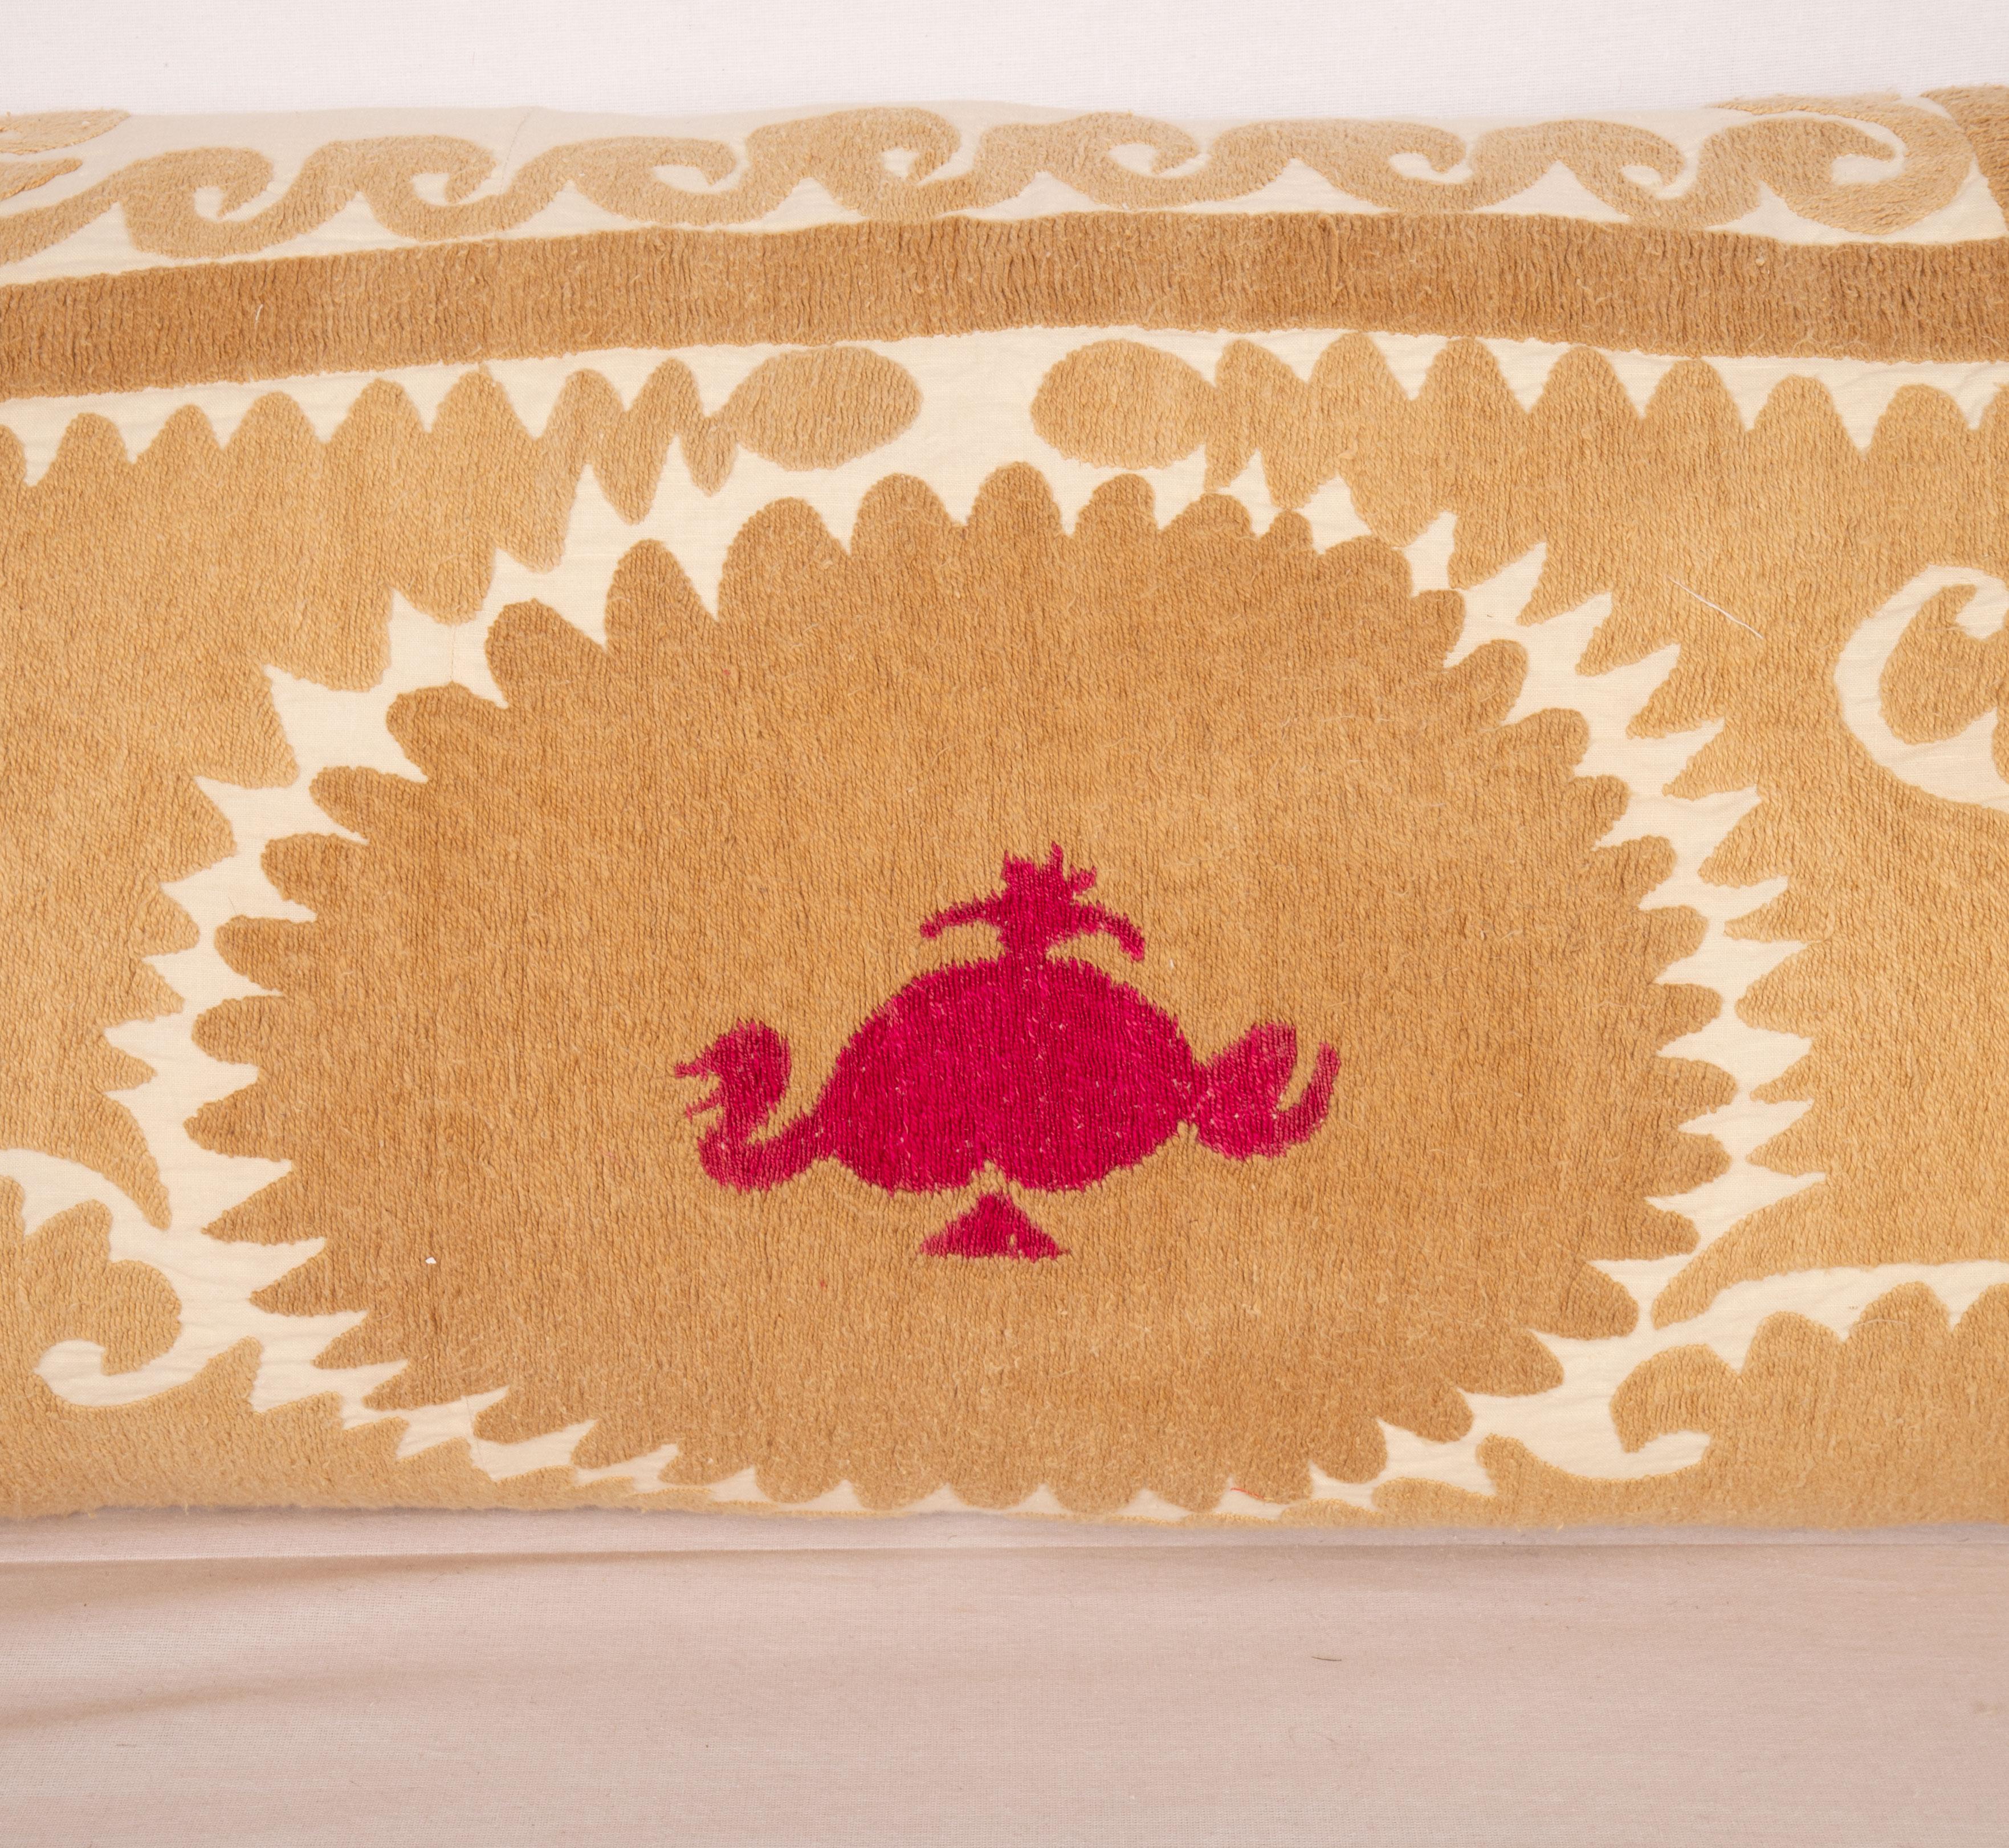 20th Century Suzani Pillow Case, Made from a Mid 20th C. Uzbek Suzani